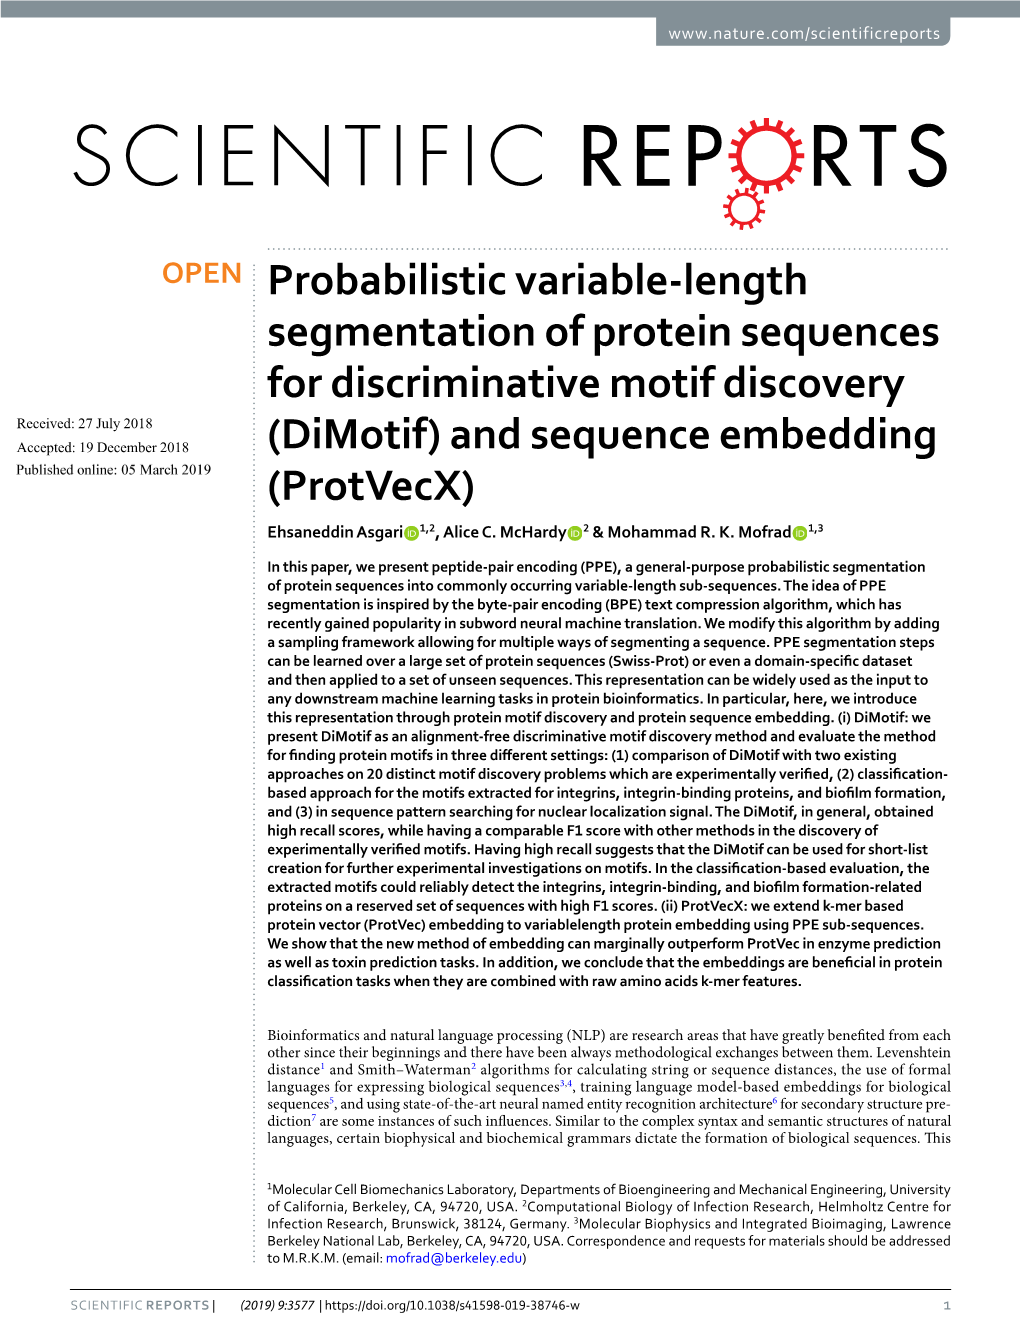 Probabilistic Variable-Length Segmentation of Protein Sequences